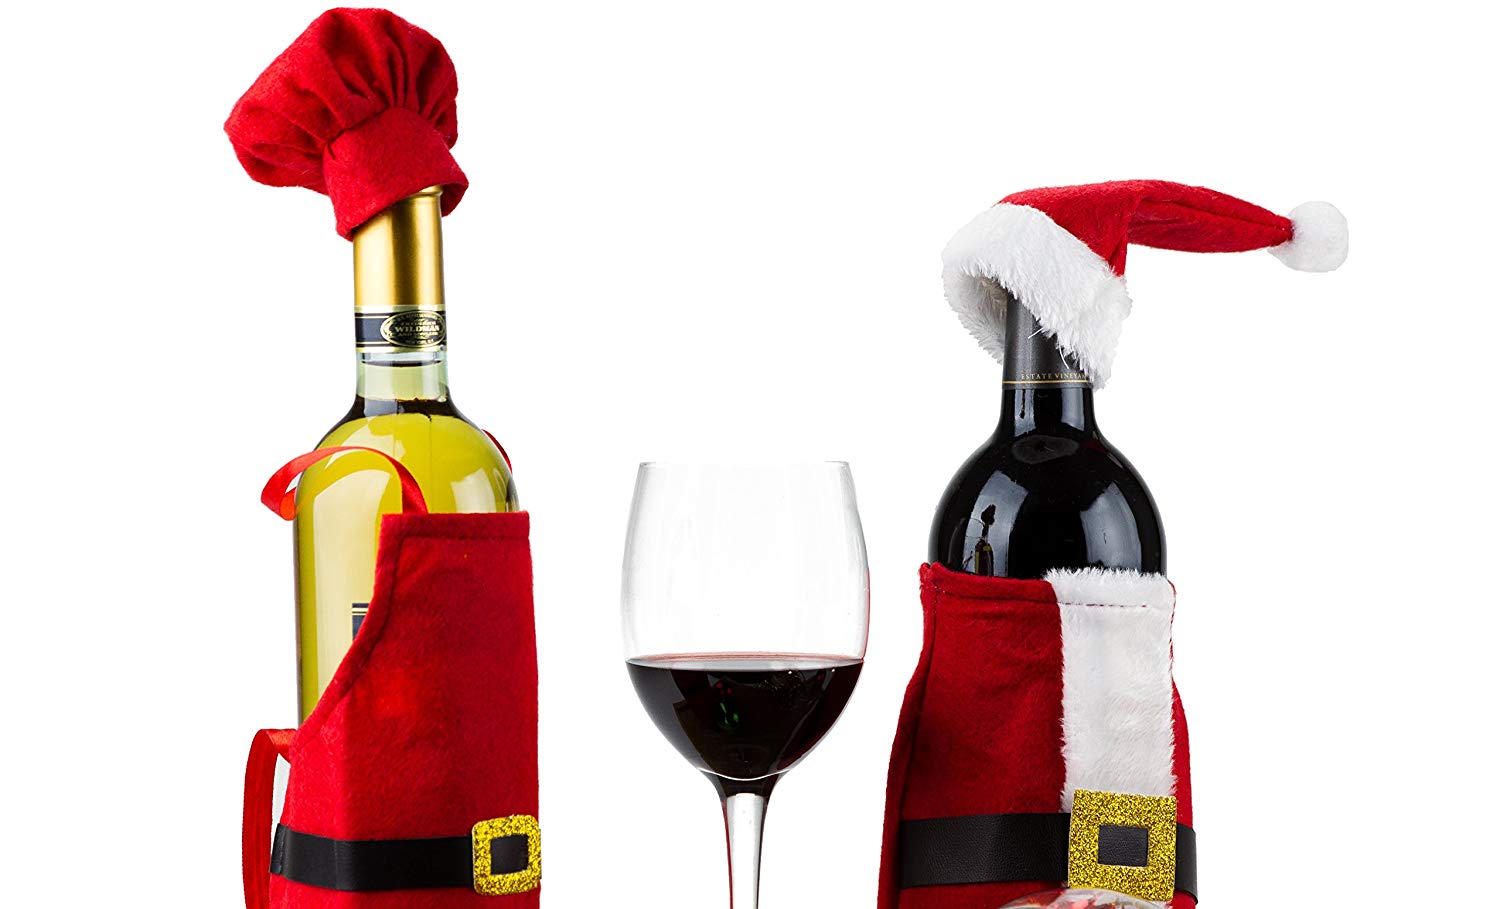 4 Pcs Christmas Wine Bottle Covers Set - Santa and Little Helpers Christmas Wine Decorations